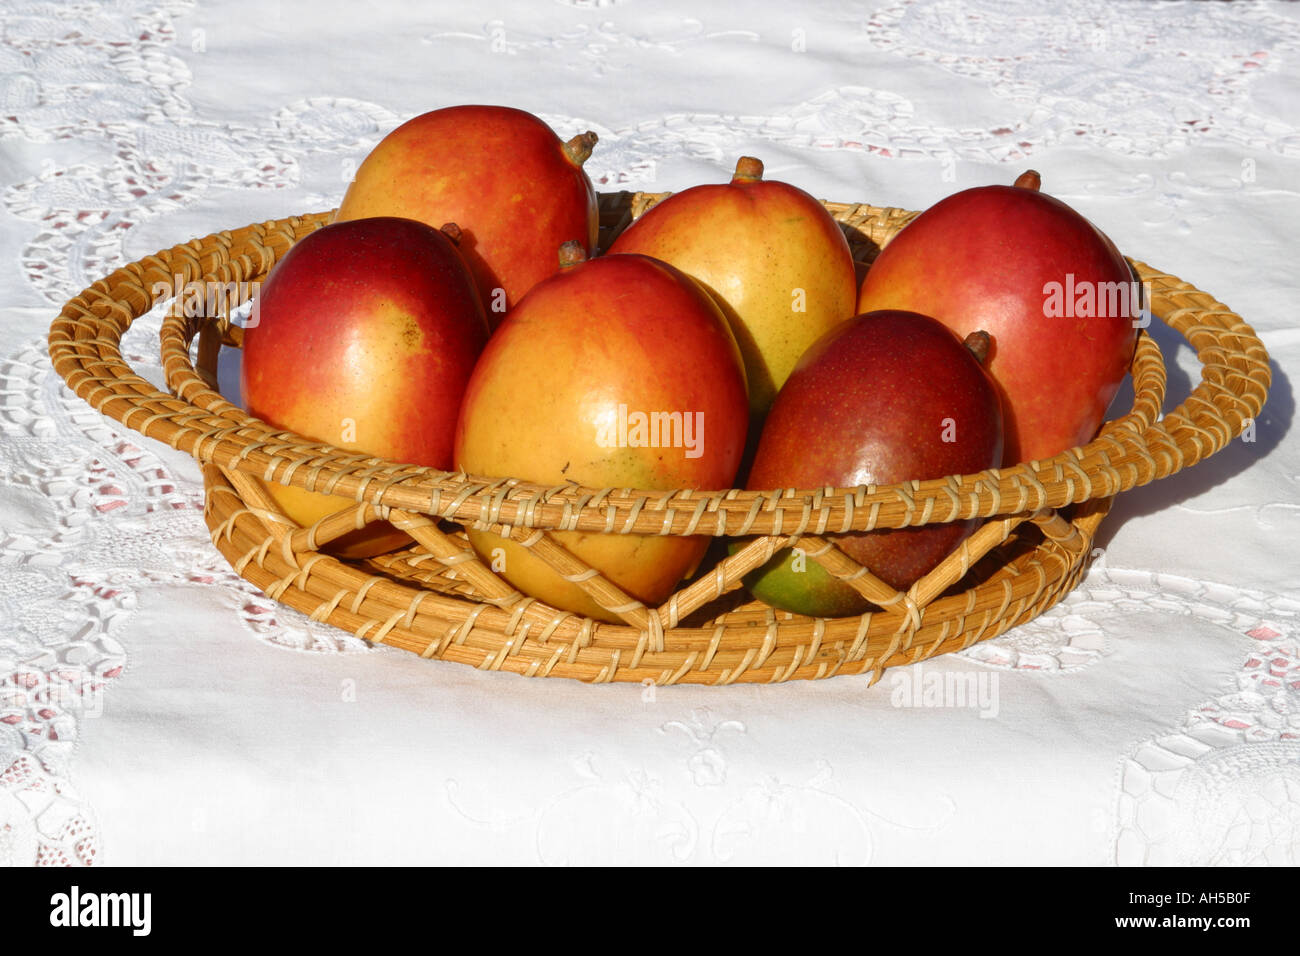 Mangoes in fruit basket on white table clothe Stock Photo